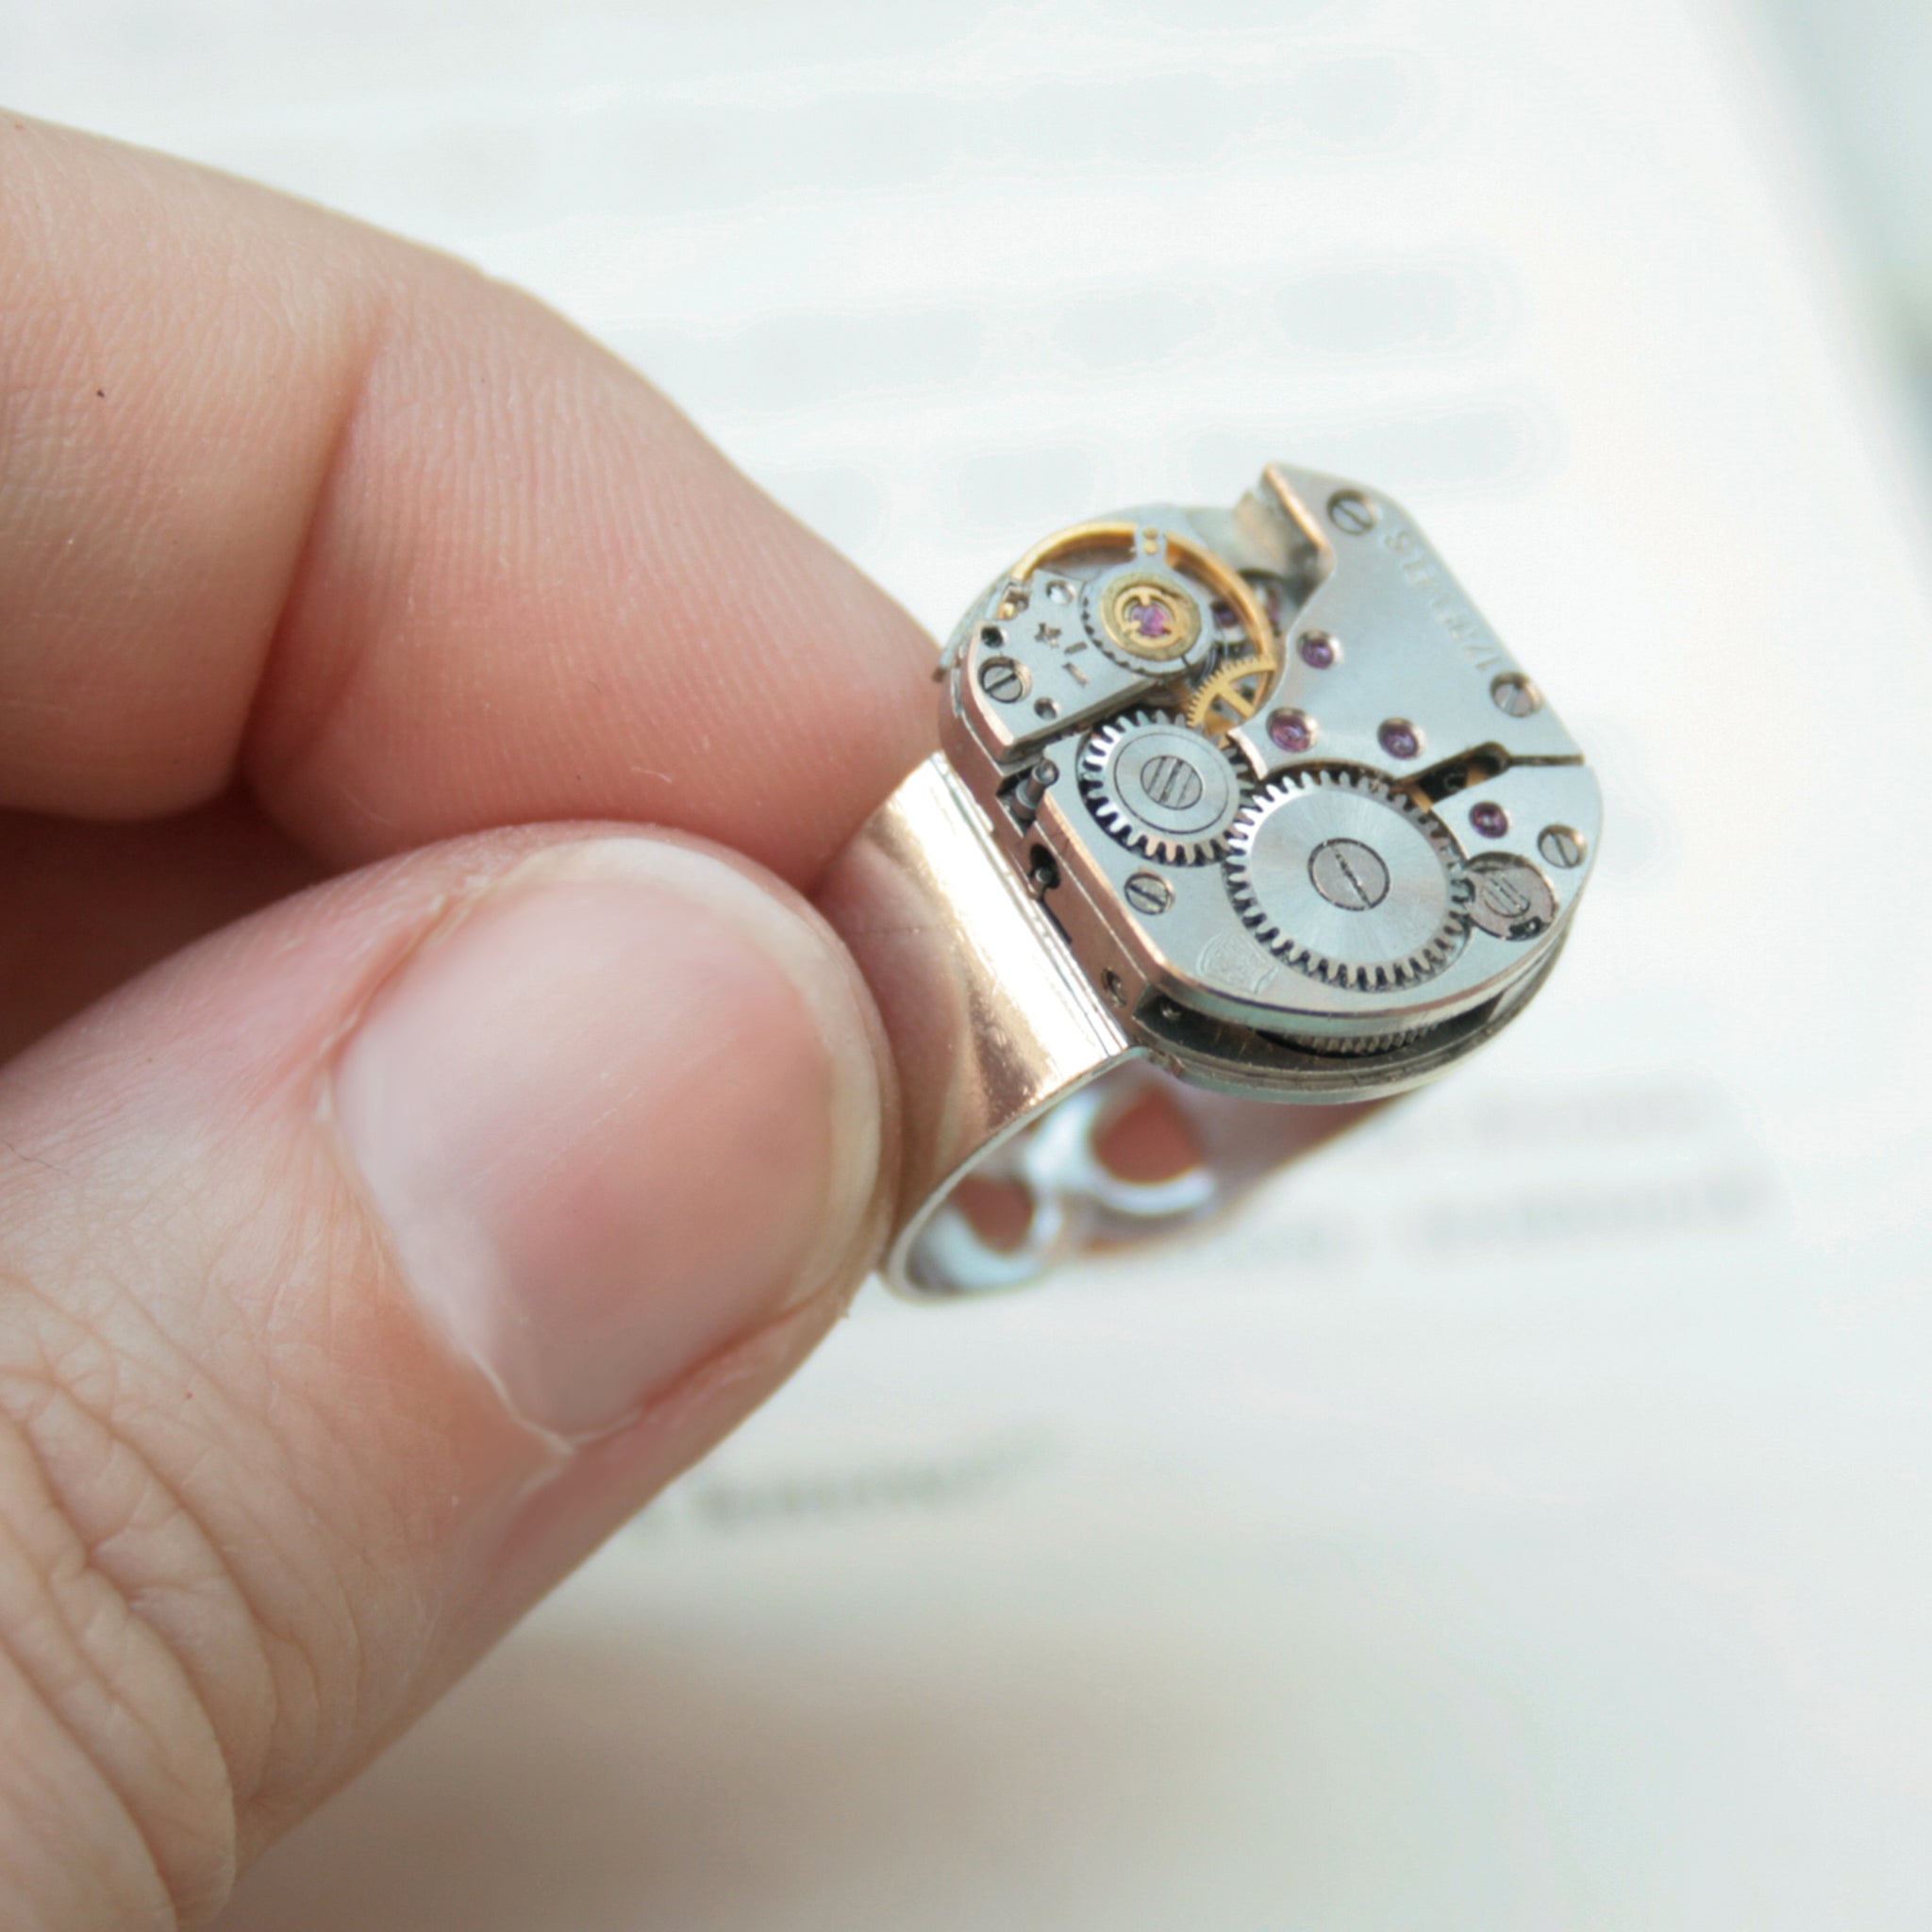 Mens Pinky Ring in Steampunk Style made of watch movement in silver color being hold in hand